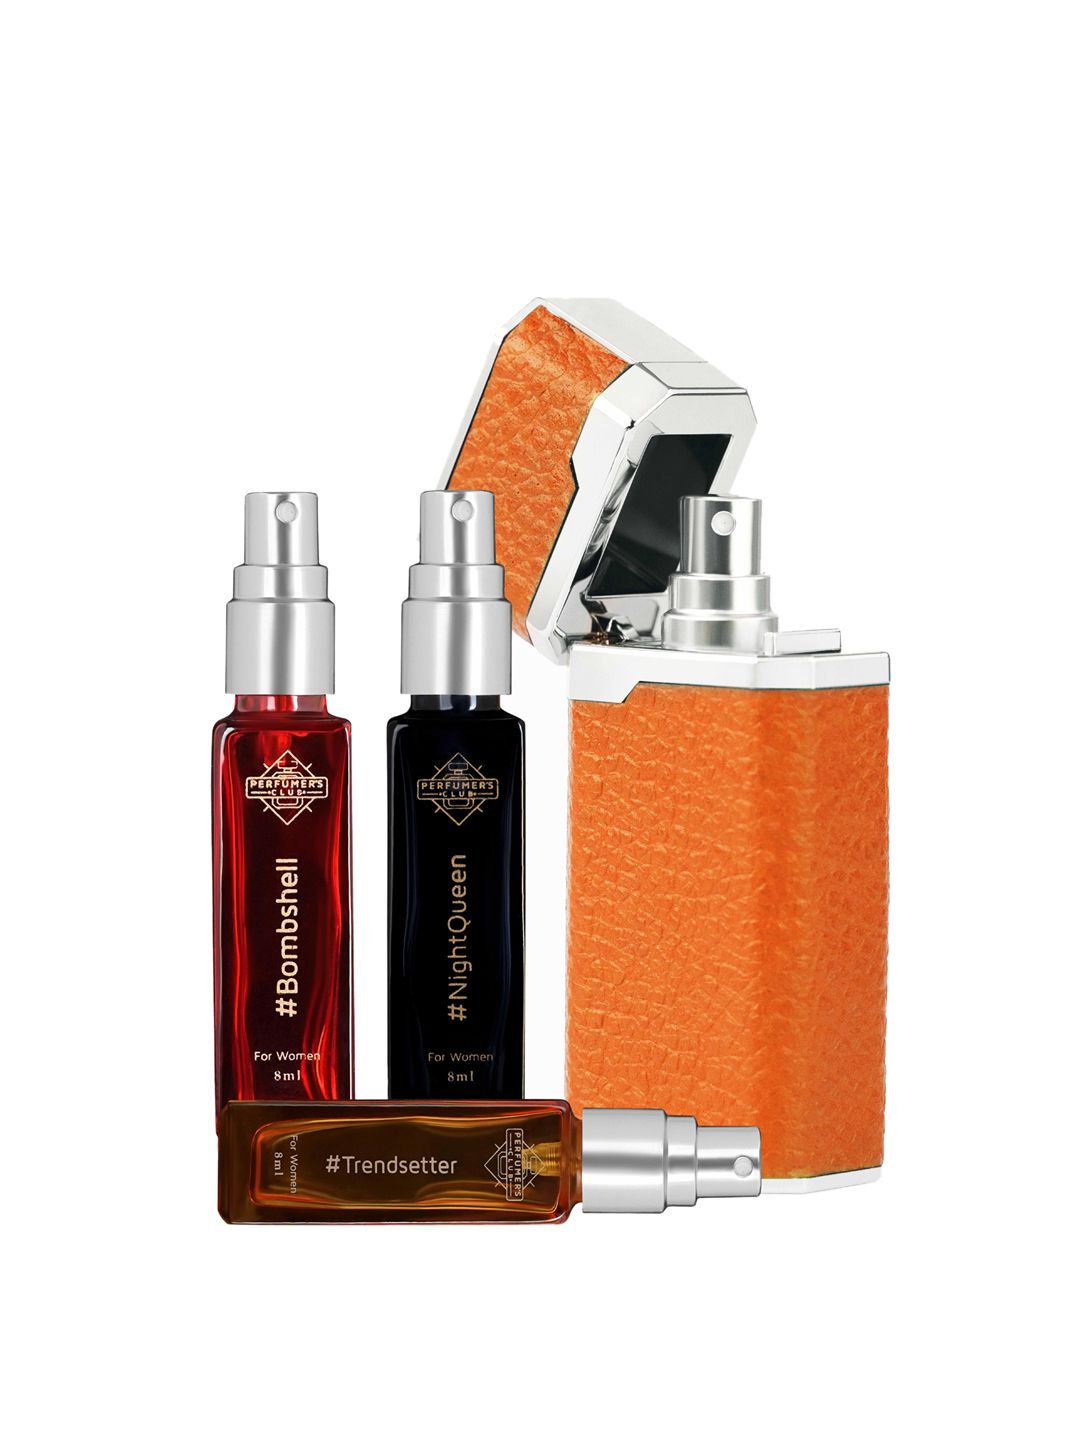 PERFUMERS CLUB Woman Lightr Set of 3 #Bombshell, #Trendsetter & #NightQueen Carry EDP Price in India